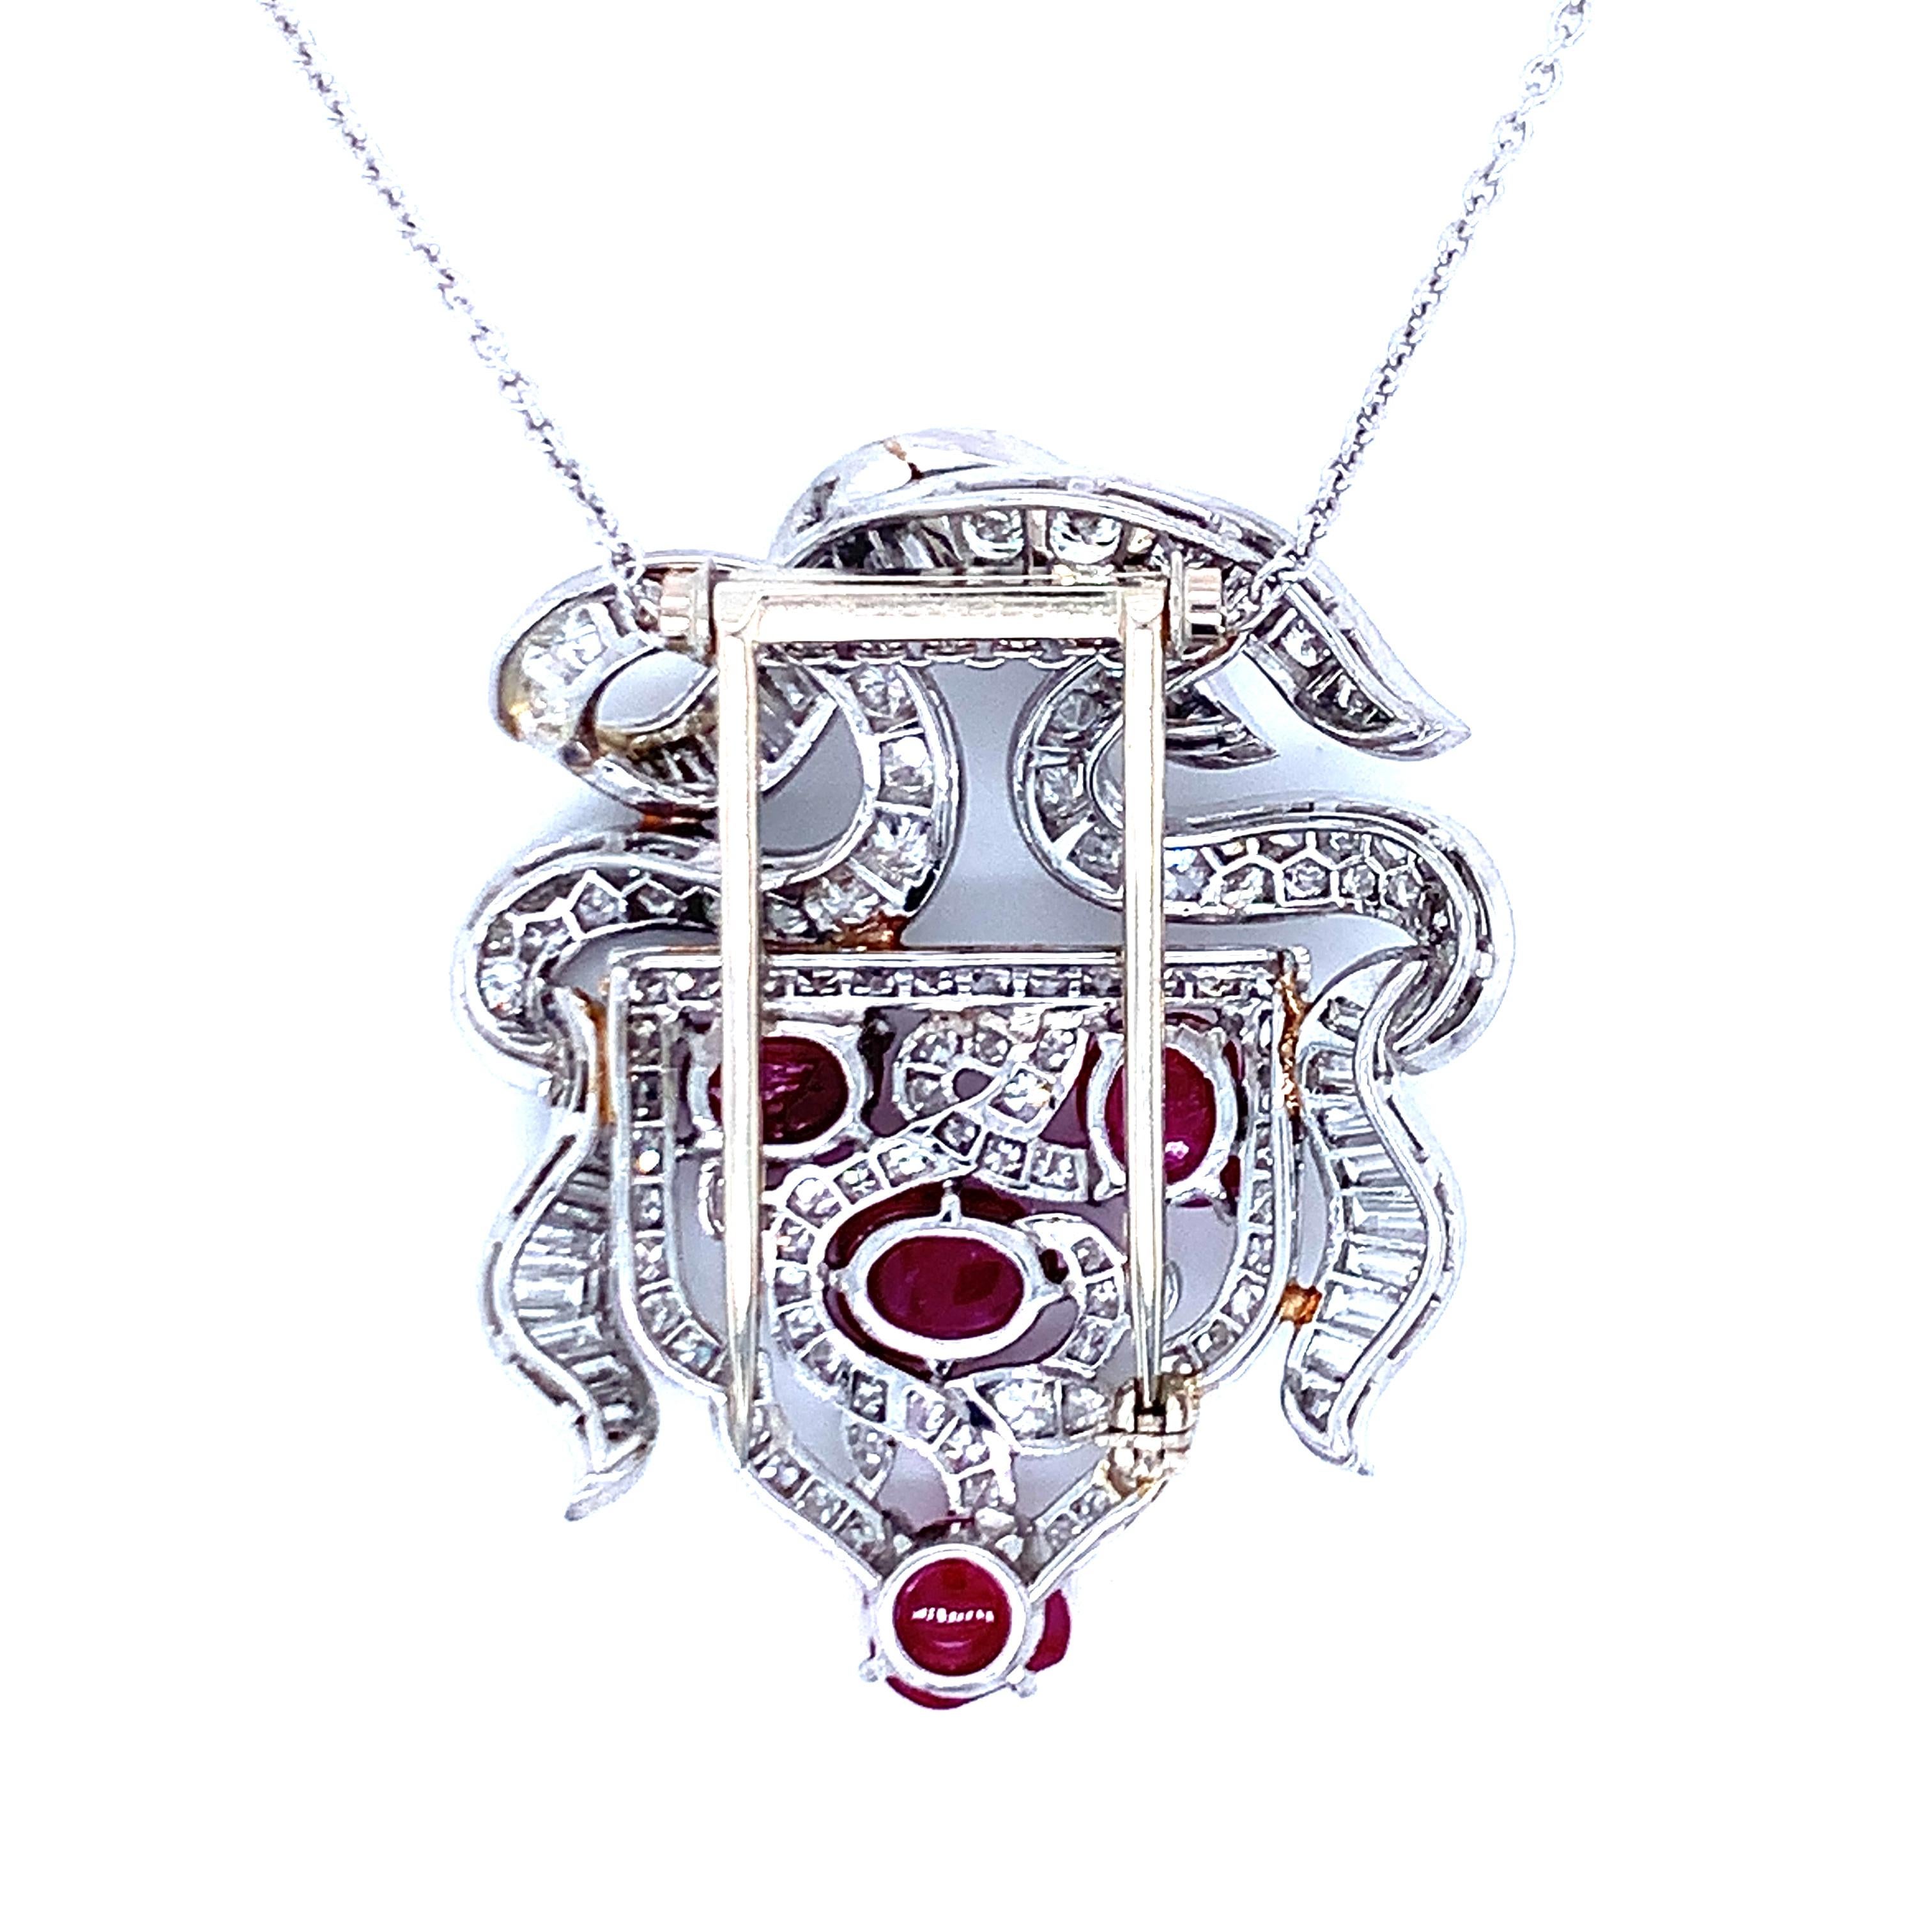 One Art Deco carved ruby and diamond platinum pendant featuring 4 carved, leaf motif cabochon rubies weighing a total of 4 ct. with GIA certificate confirming Burmese origin with no heat indications. The pendant is enhanced by 160 round brilliant